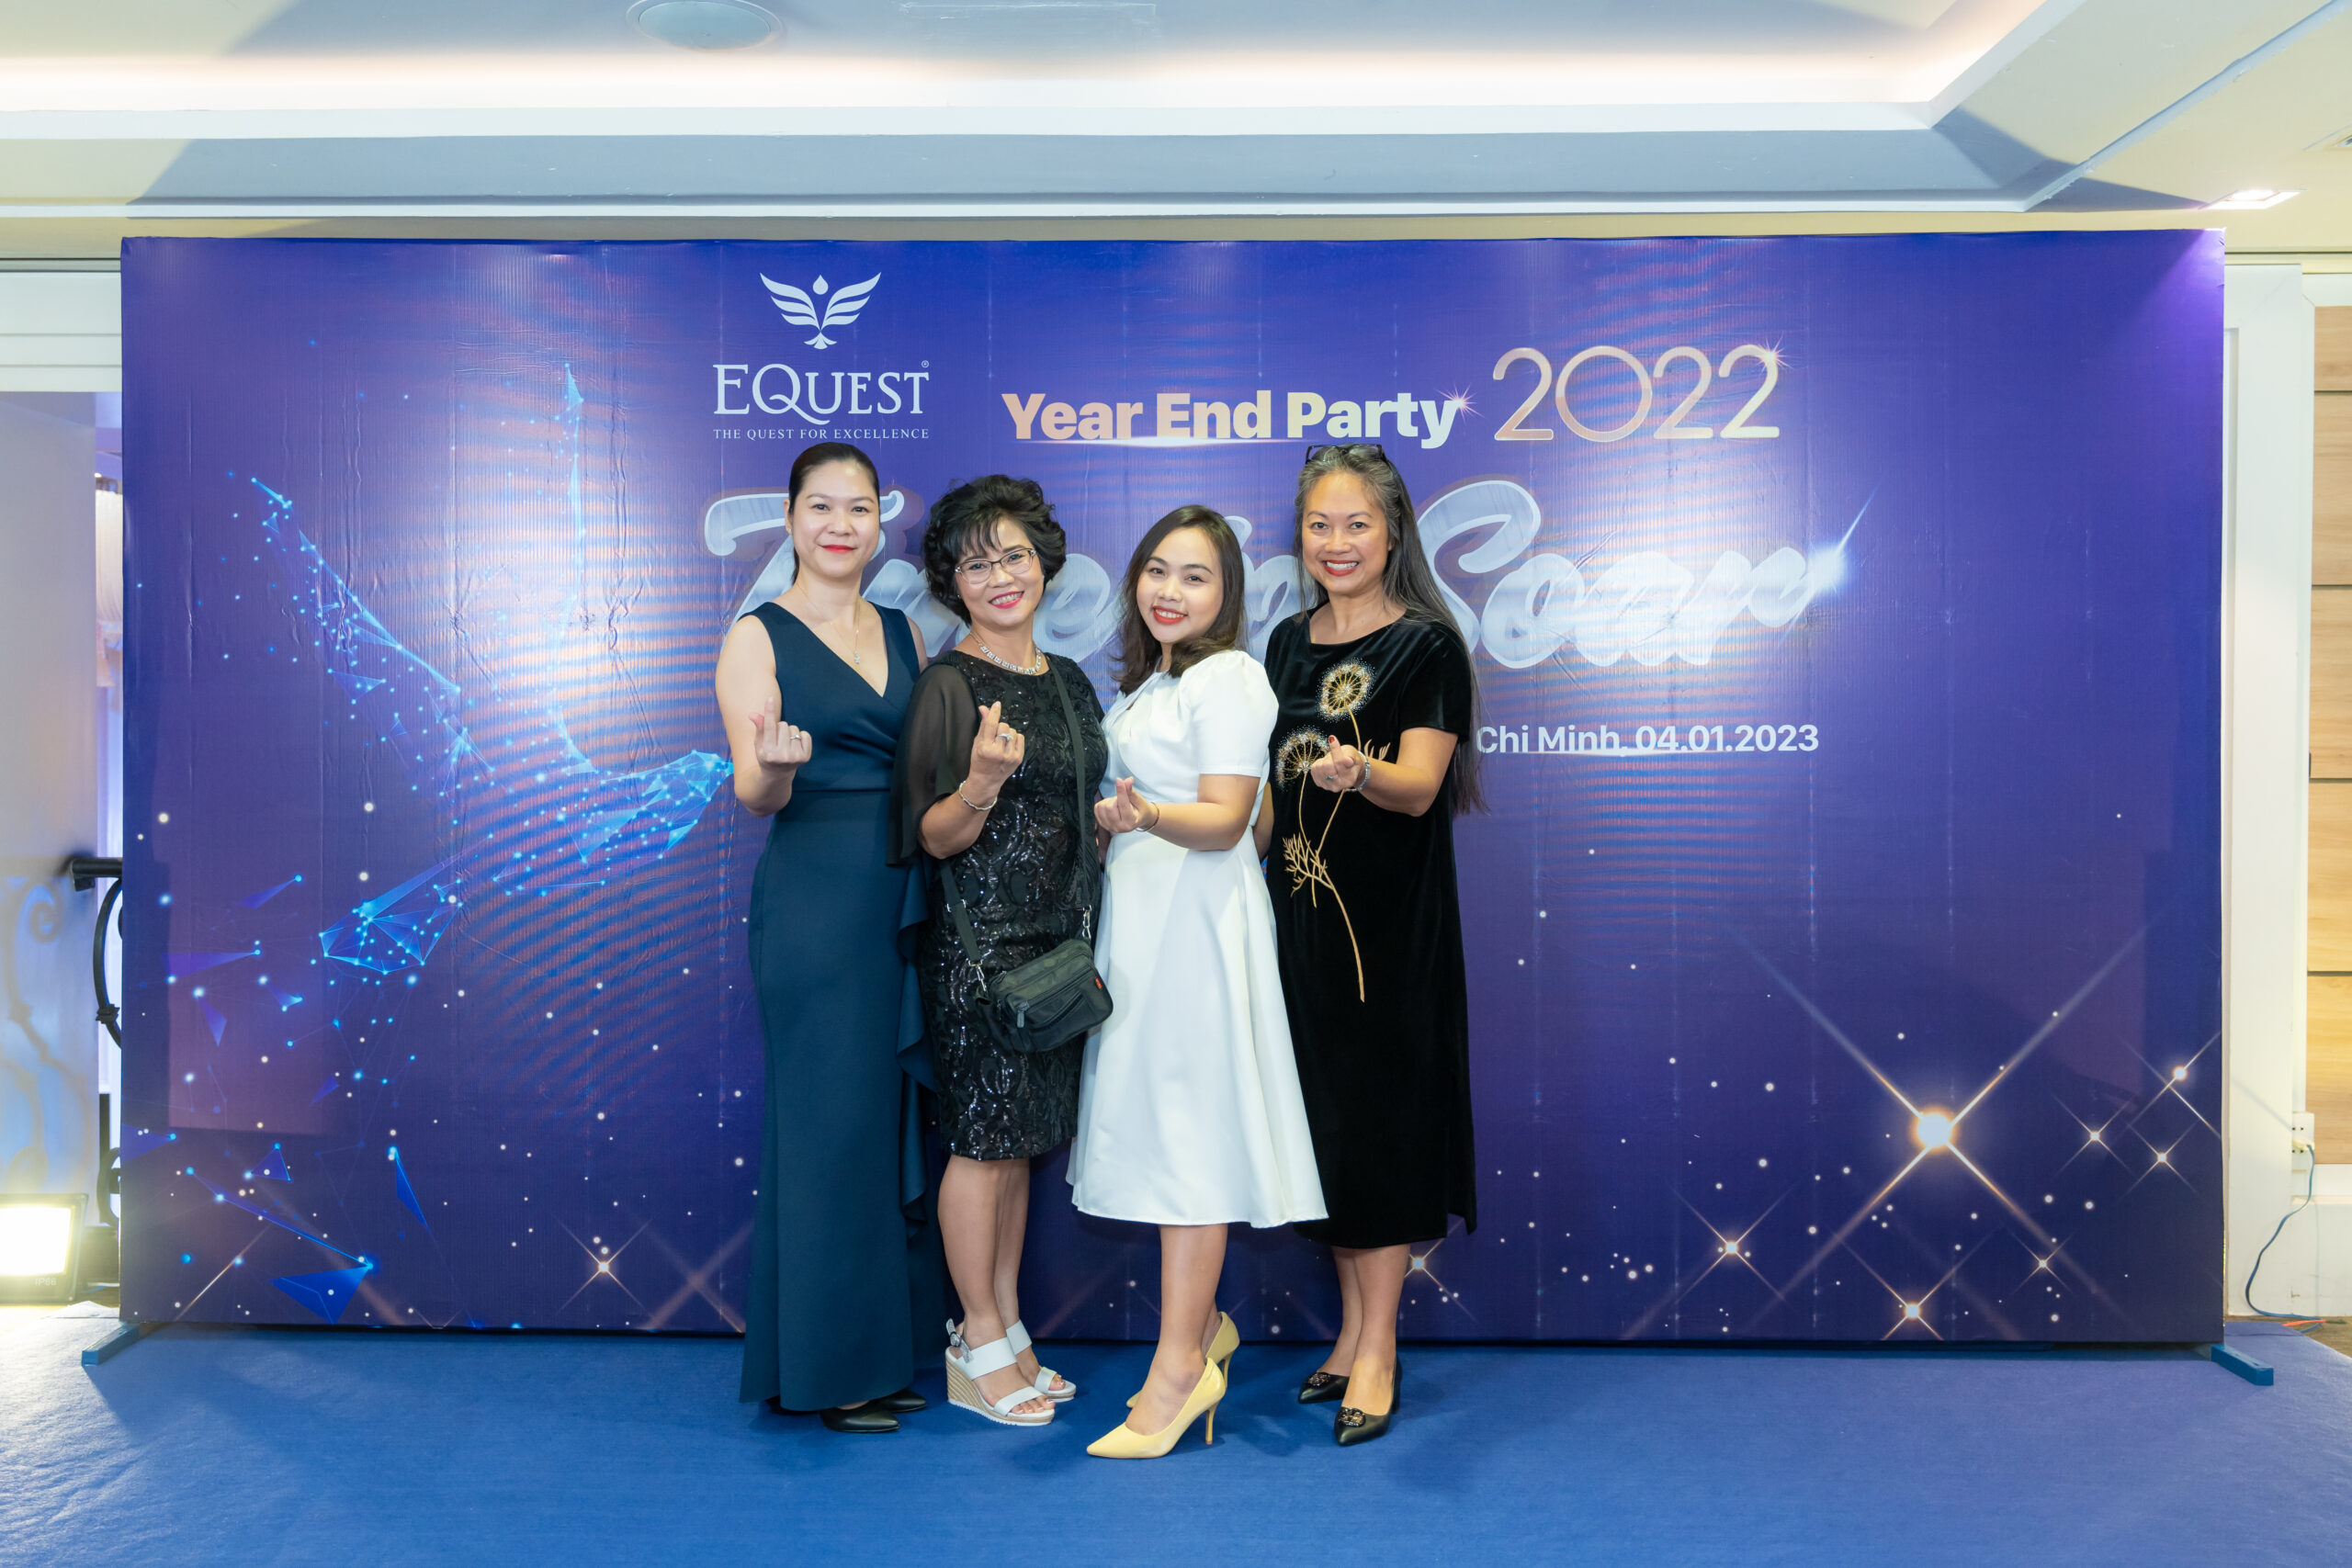 VietRace Tổ Chức Year End Party Cho EQuest Tại Quận 10